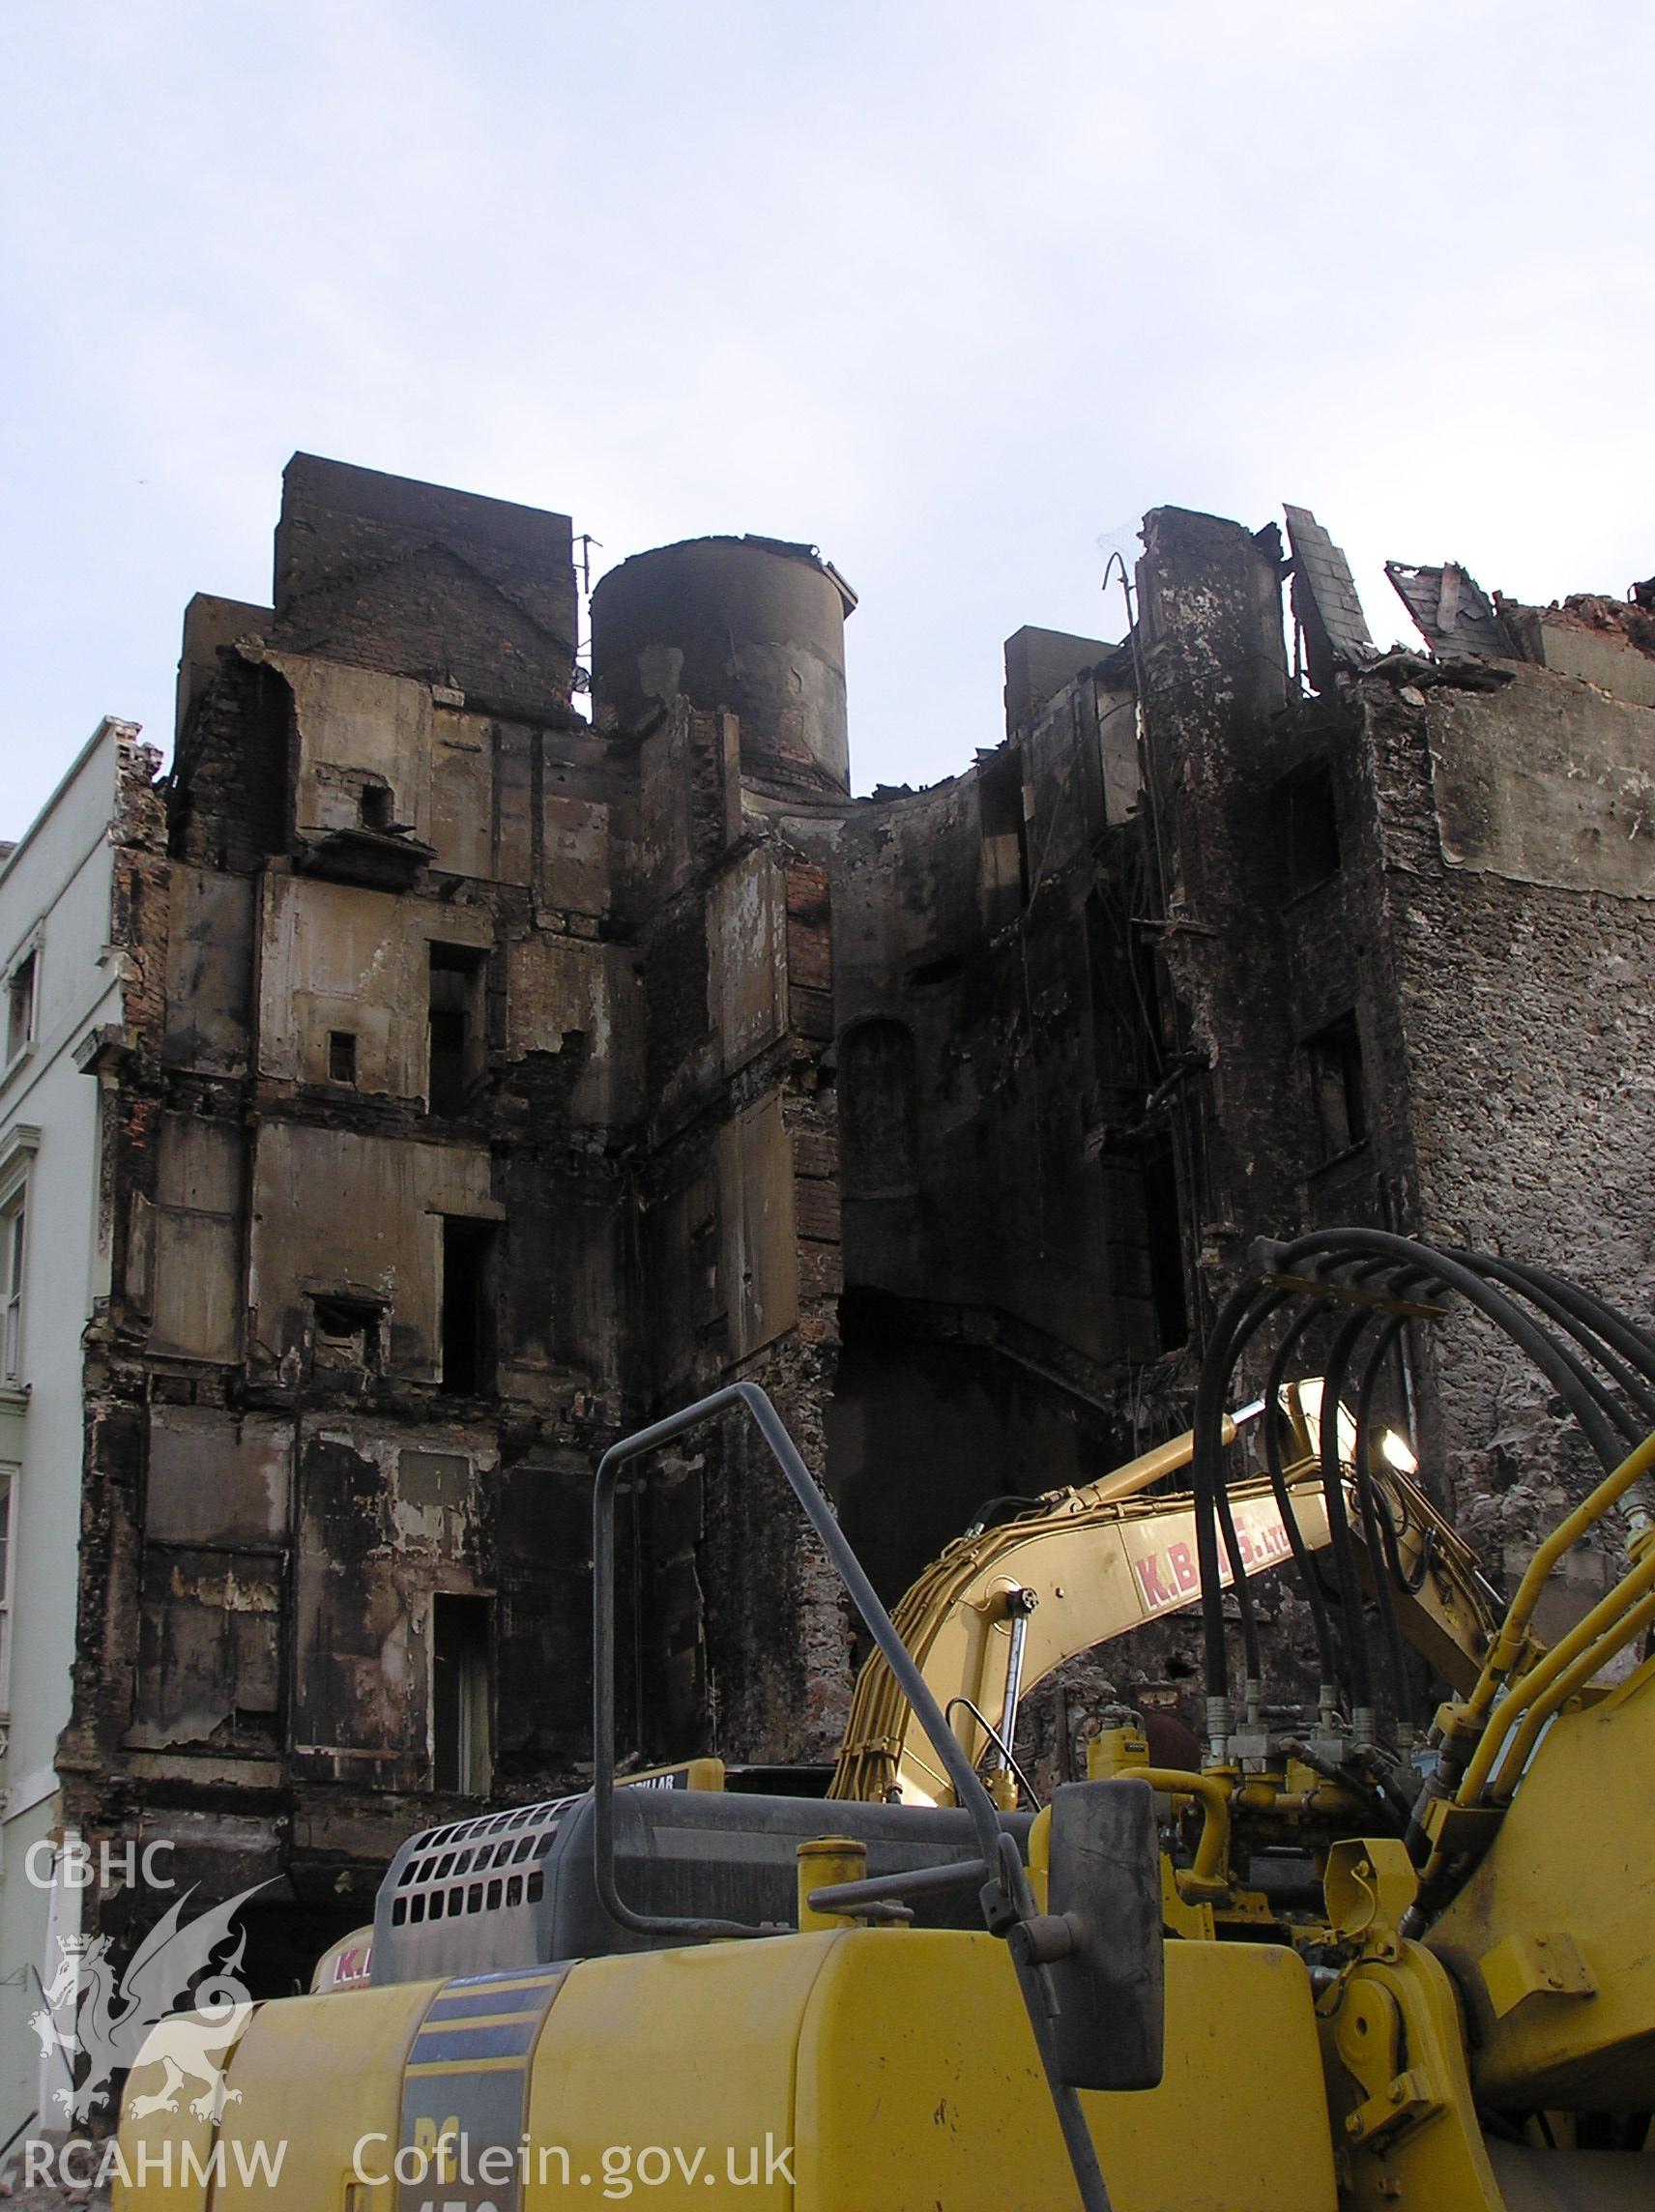 Colour digital photograph showing The Royal Gatehouse Hotel being demolished.